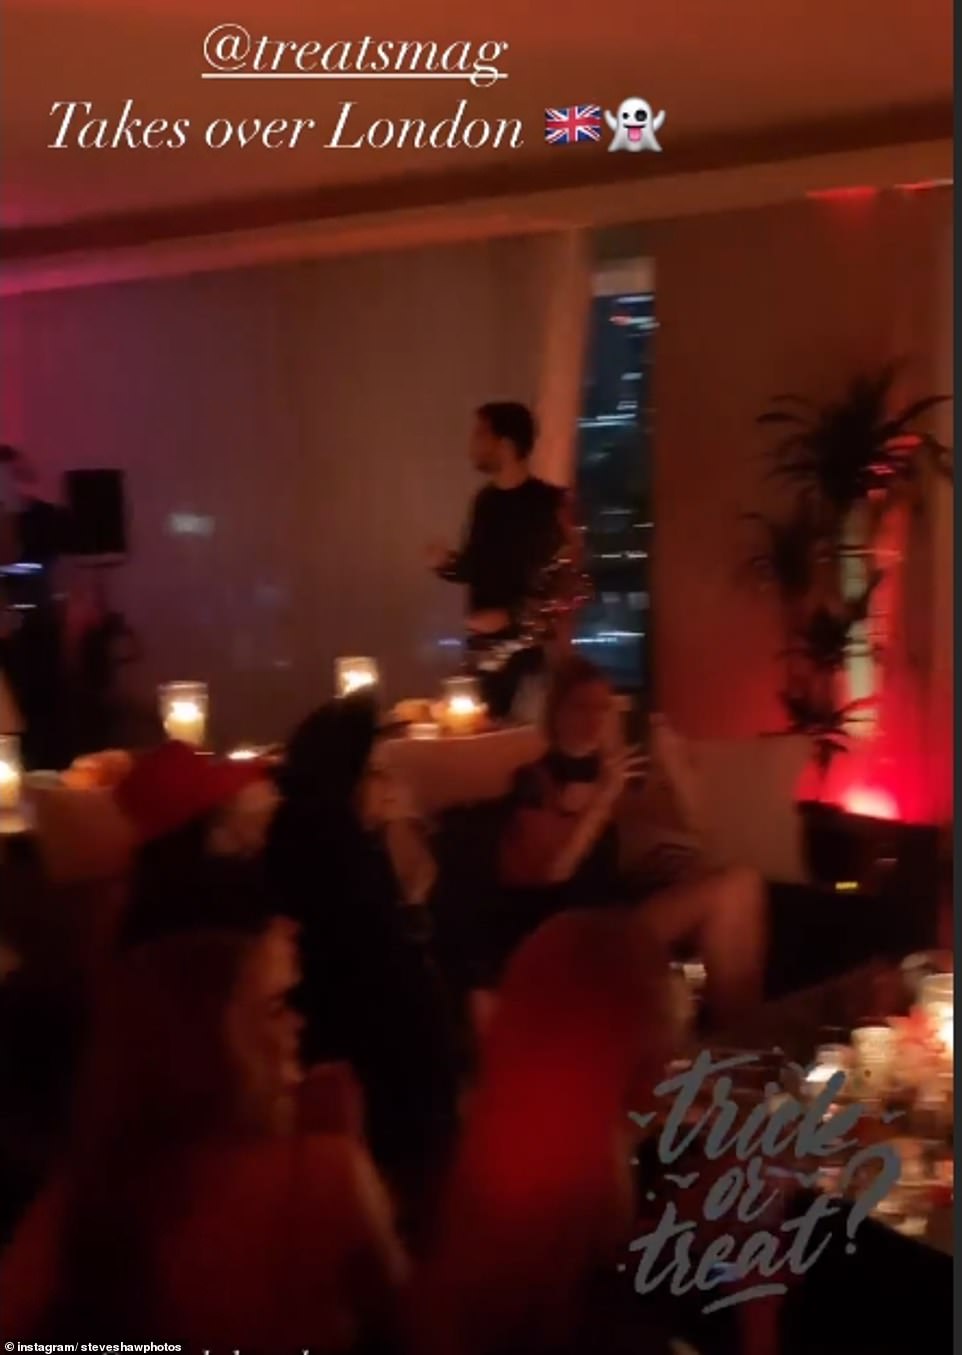 One of the videos showed no fewer than seven people sitting together inside watching models dance at a London party